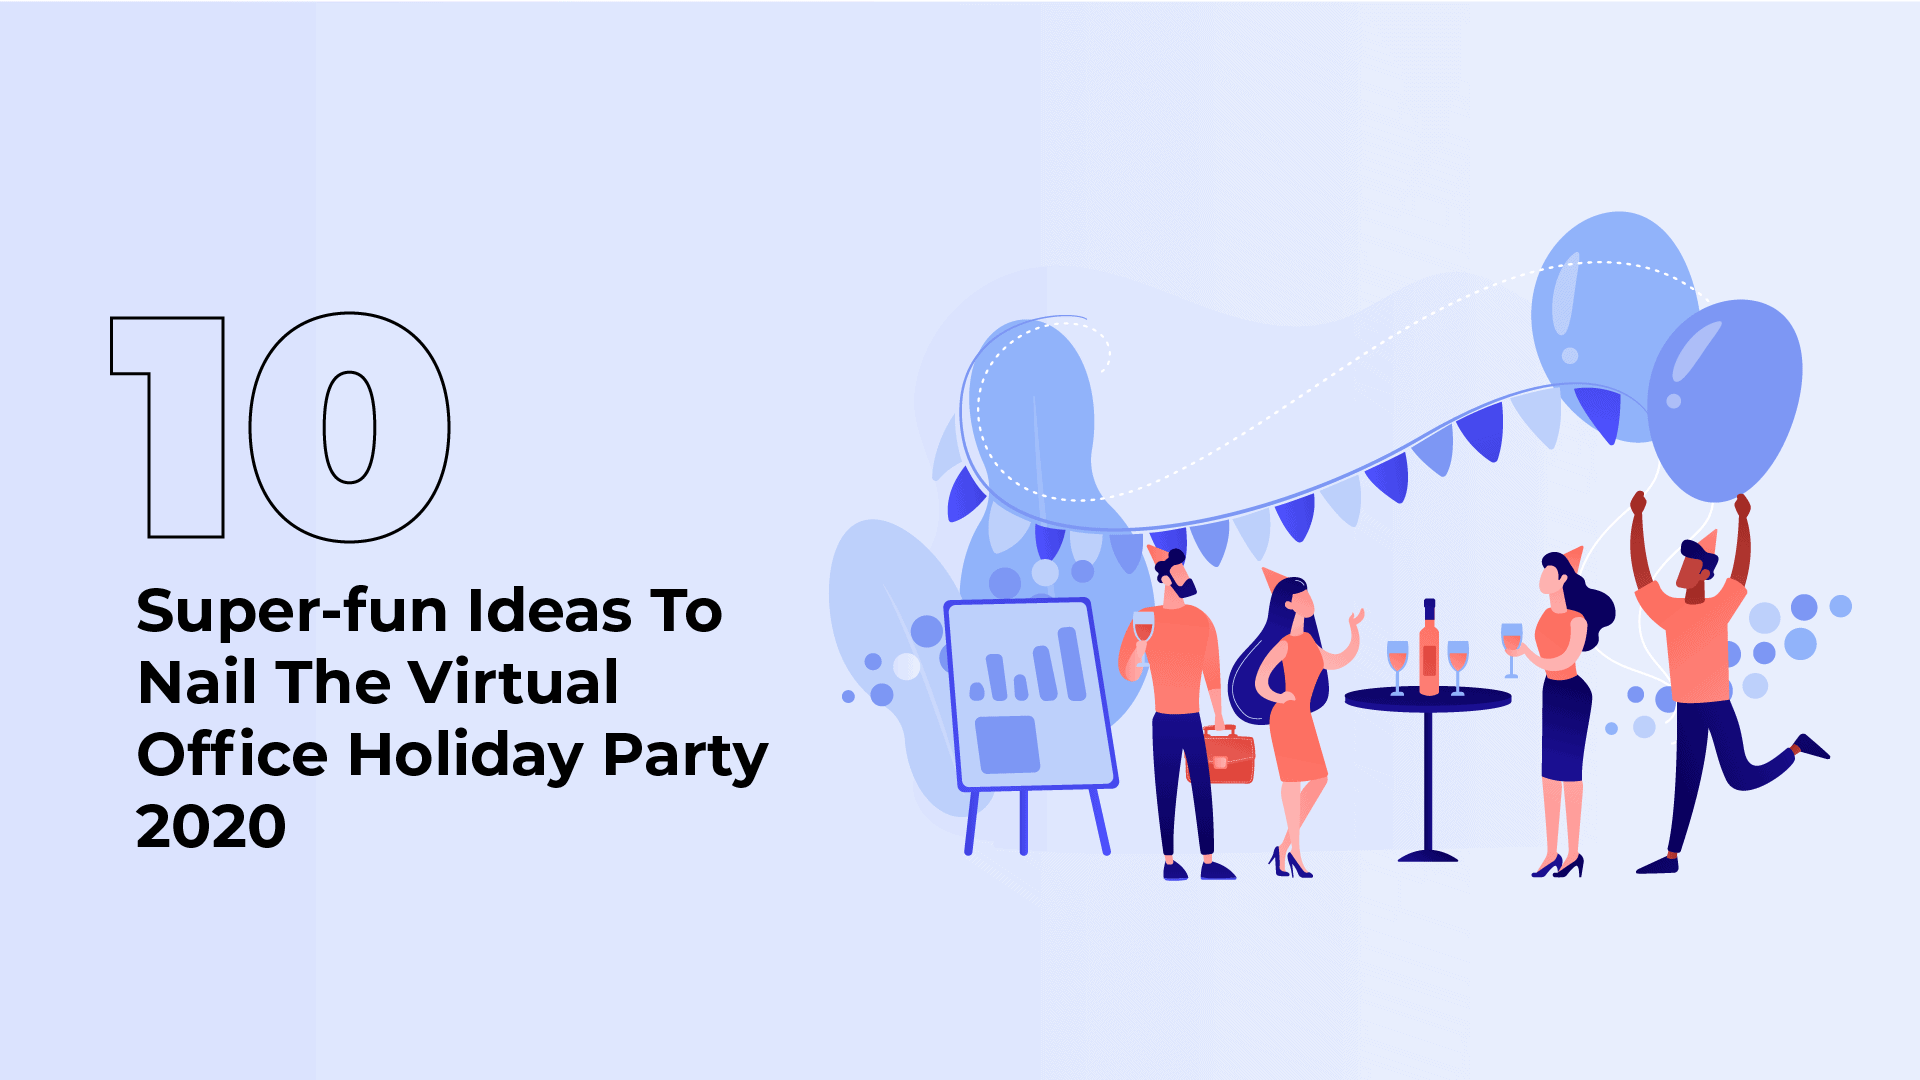 10 Super-fun Ideas To Nail The Virtual Office Holiday Party 2020